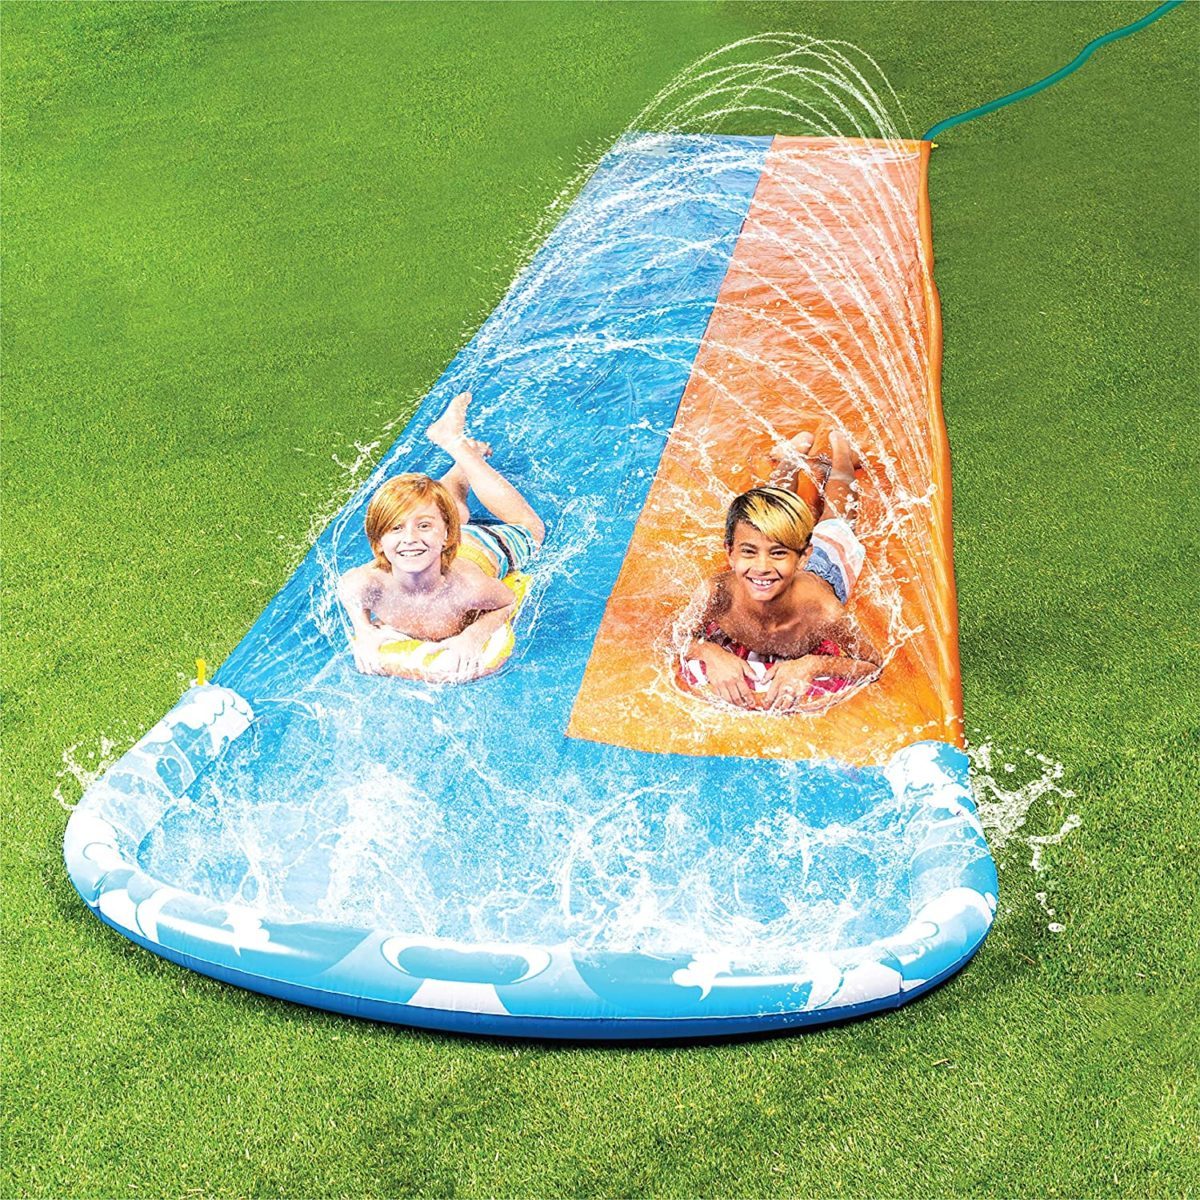 15.74 Feet Slip N Slide Giant Garden Water Slide,Slip and Slide,Inflatable Crash Pad with Water Spray Device for Water Party Outdoor Toy Water Sports Super Waterslide for Kids Double Water Slide 